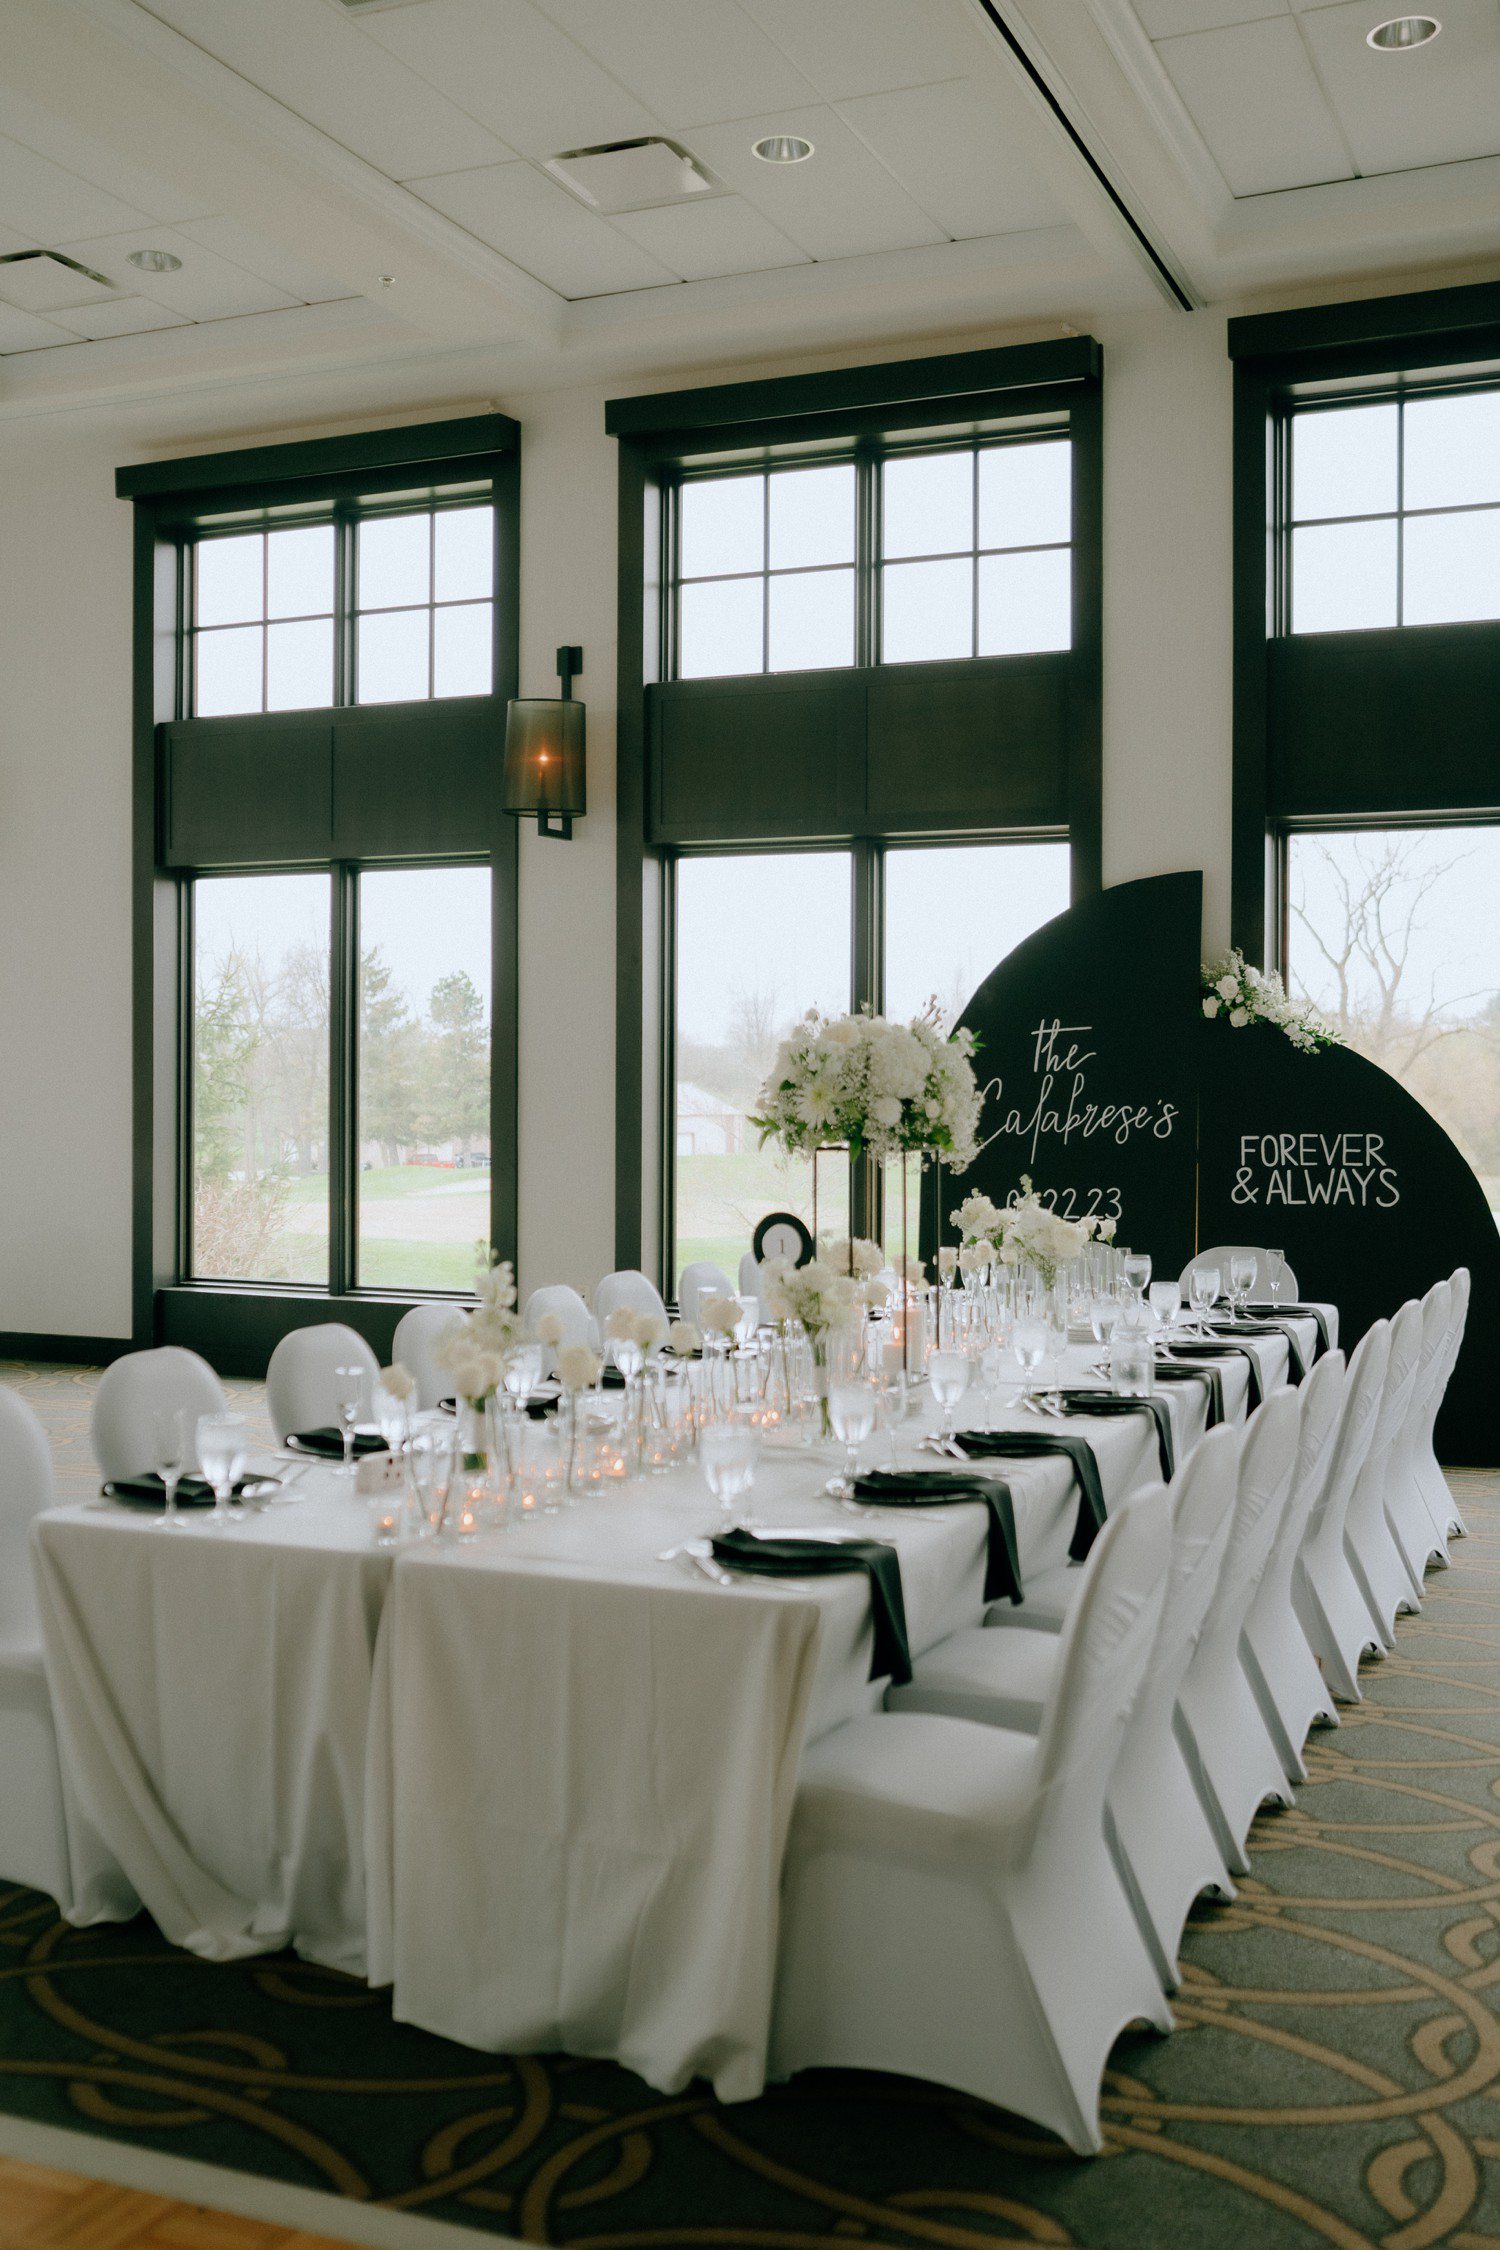 Black and white wedding reception at Watermark Country Club.